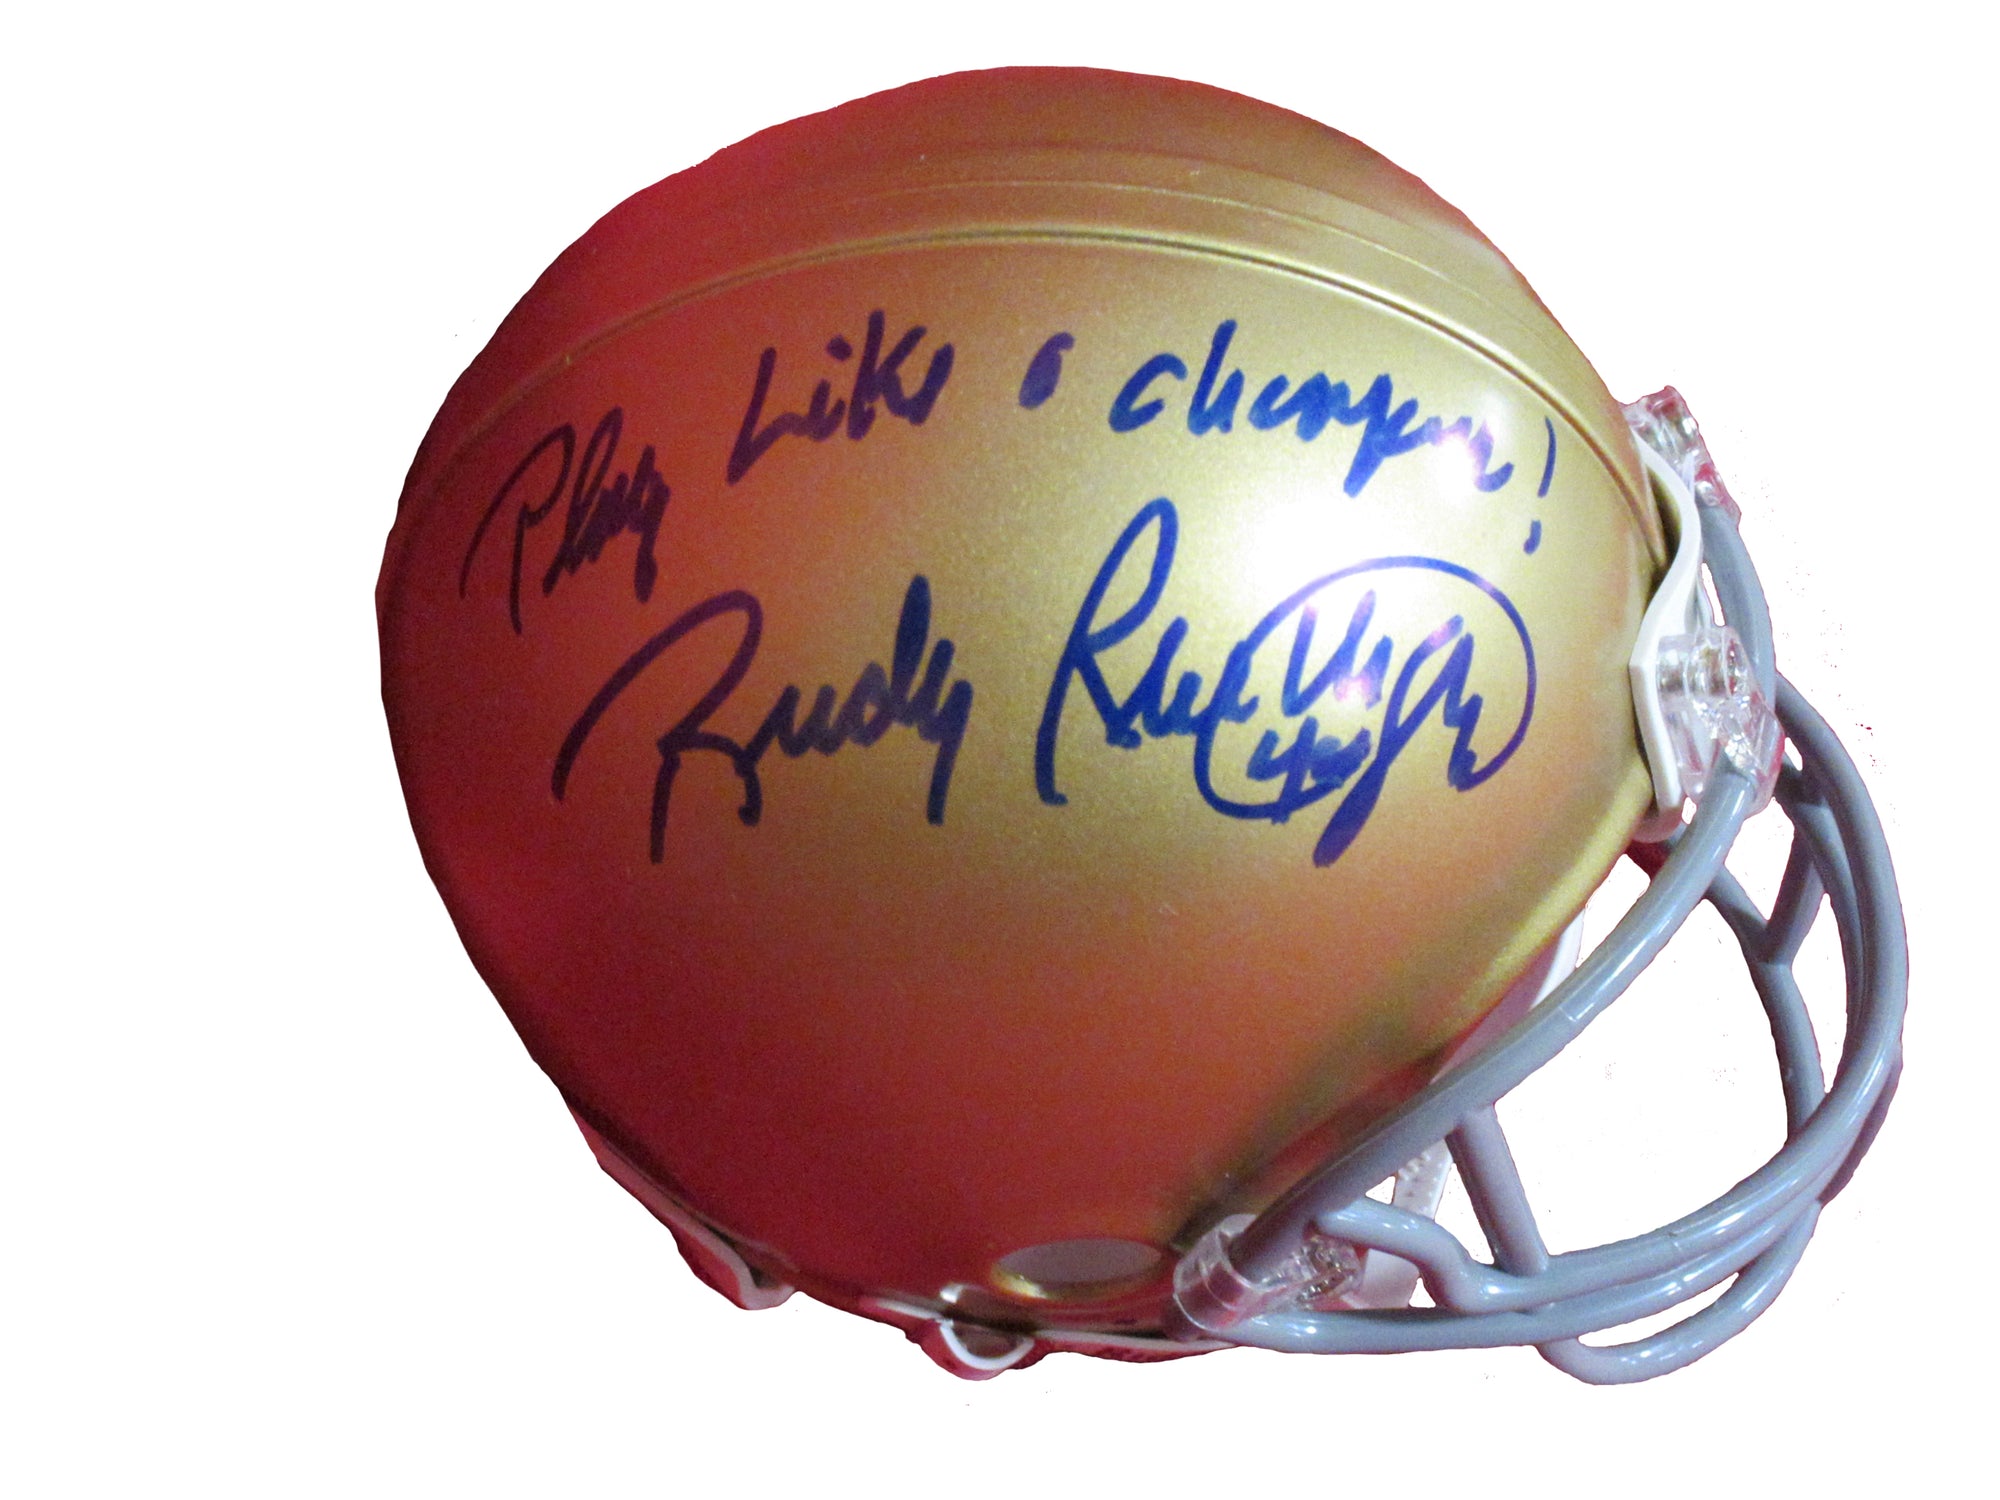 Rudy Ruettiger Autographed Notre Dame Mini-Helmet Inscribed "Play Like a Champion"